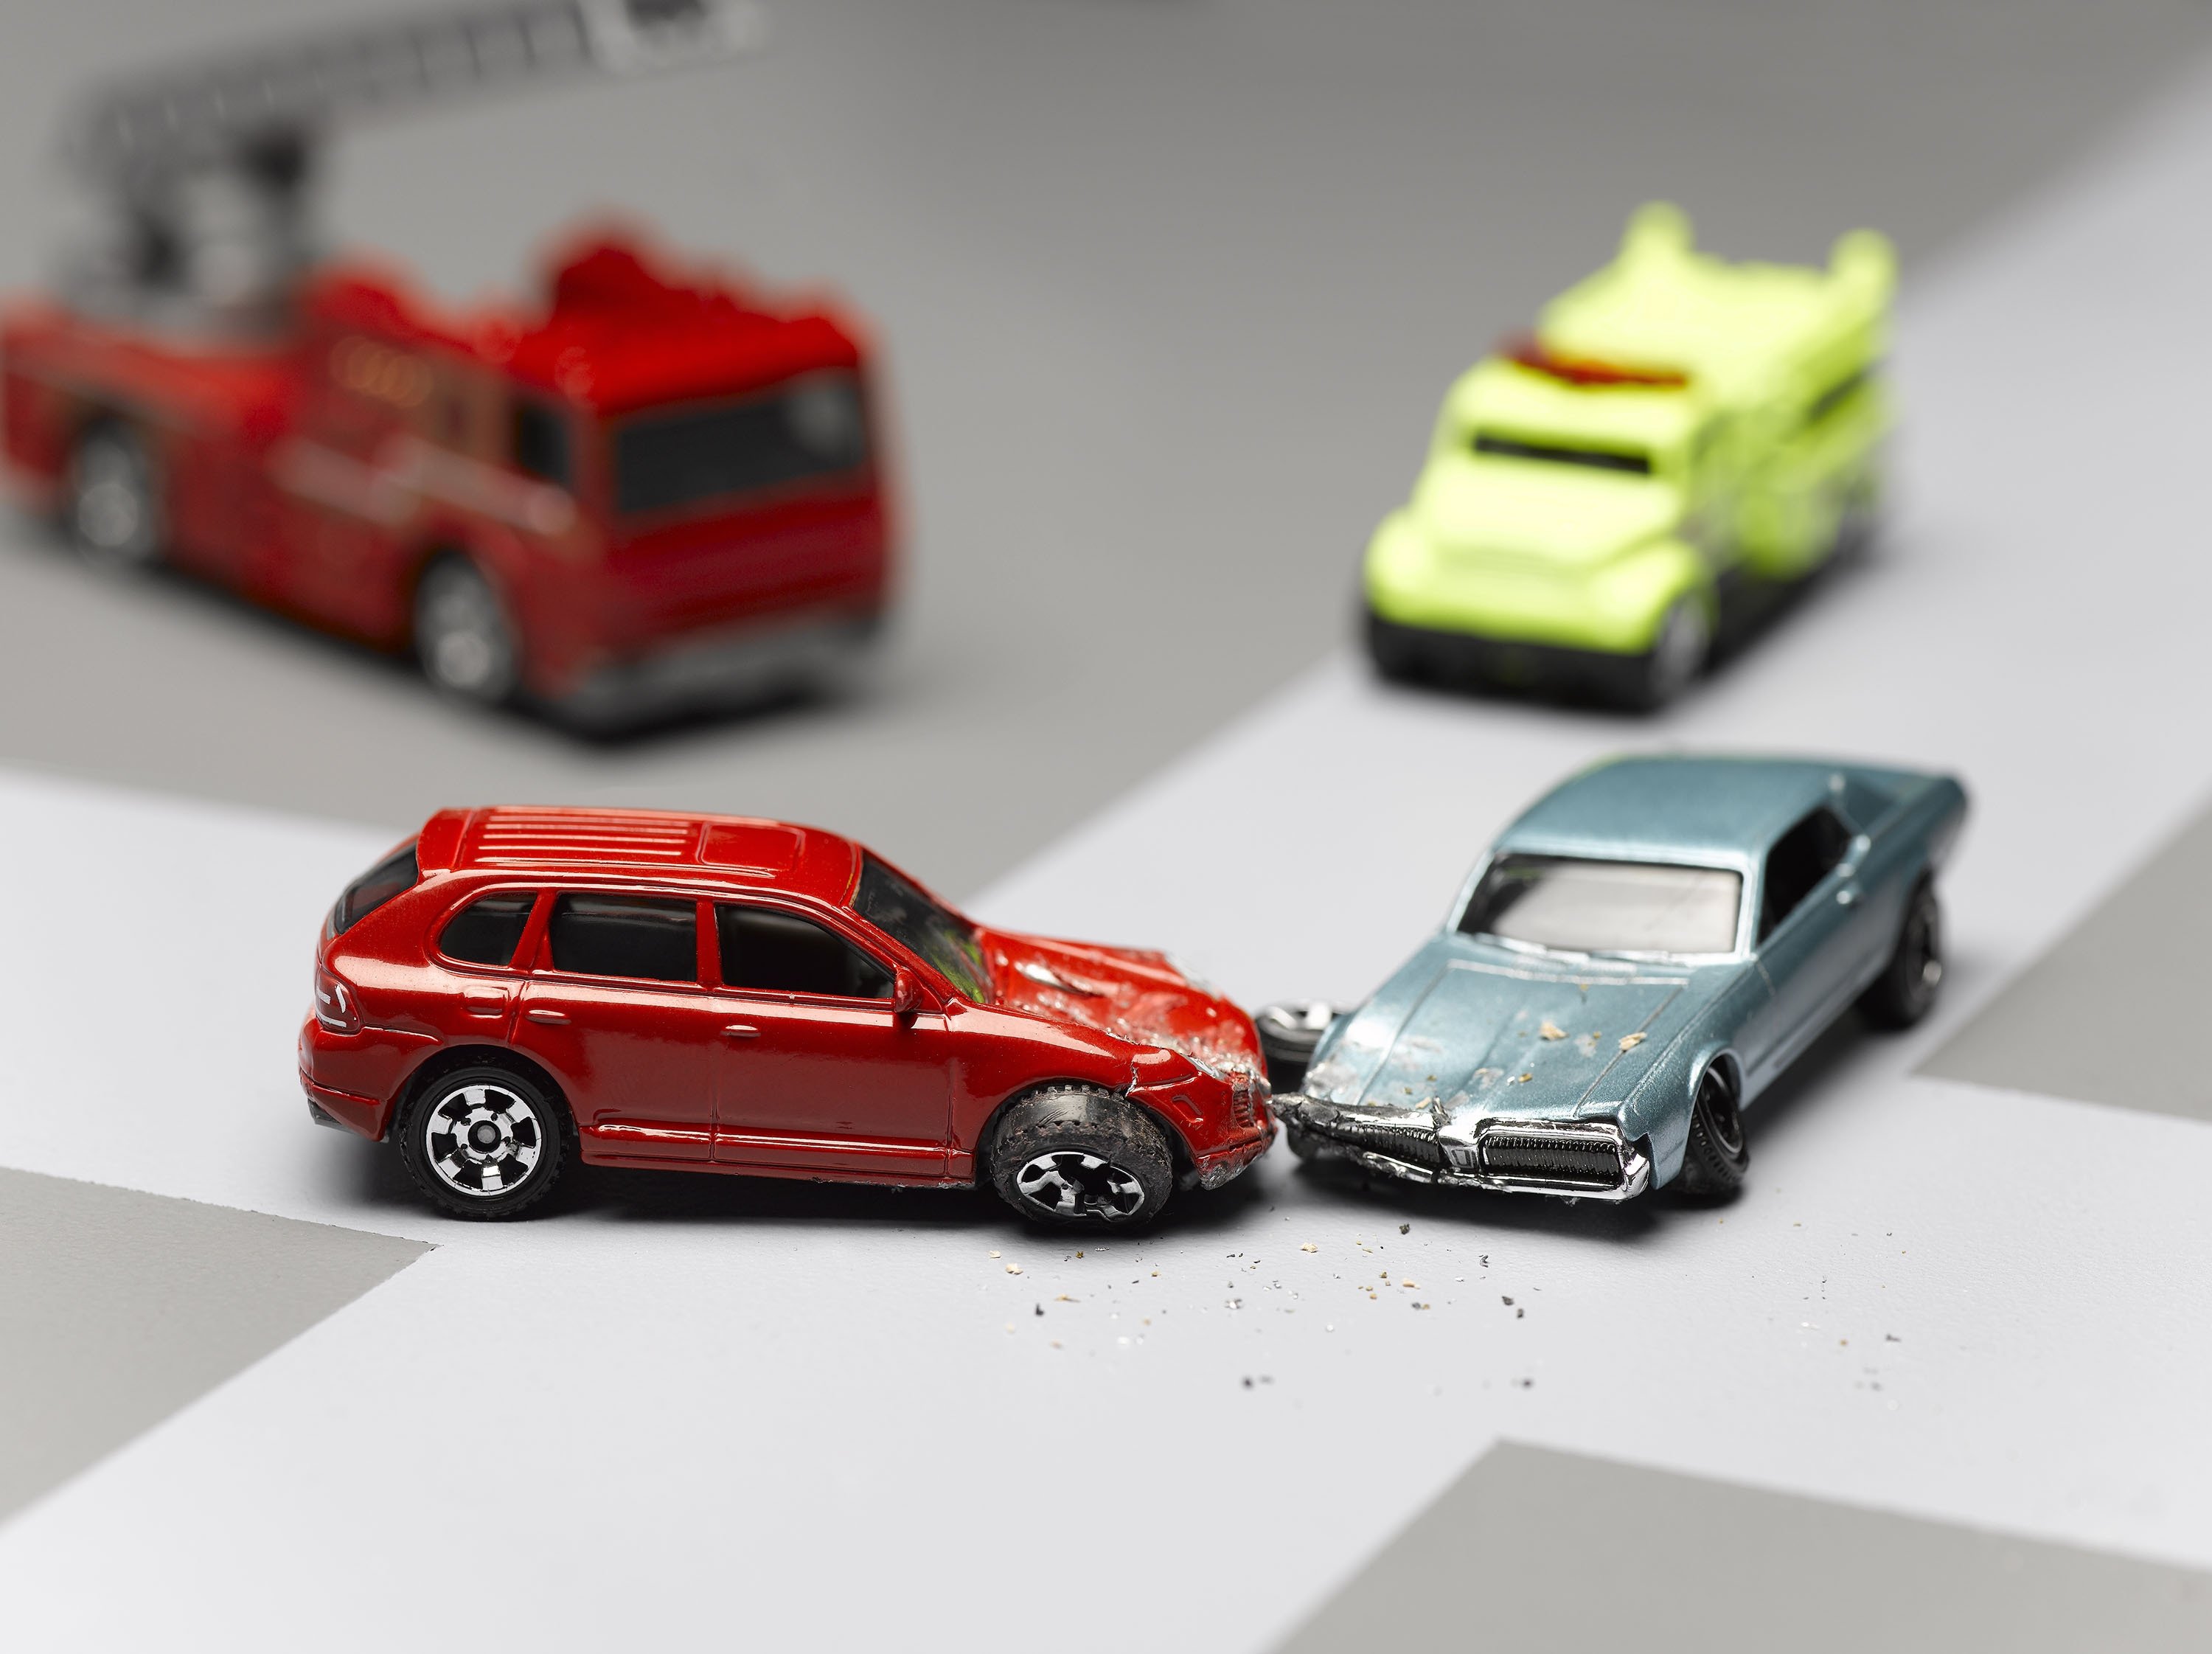 A photo showing a traffic accident enacted by model cars. (Photo by Gettyimages)